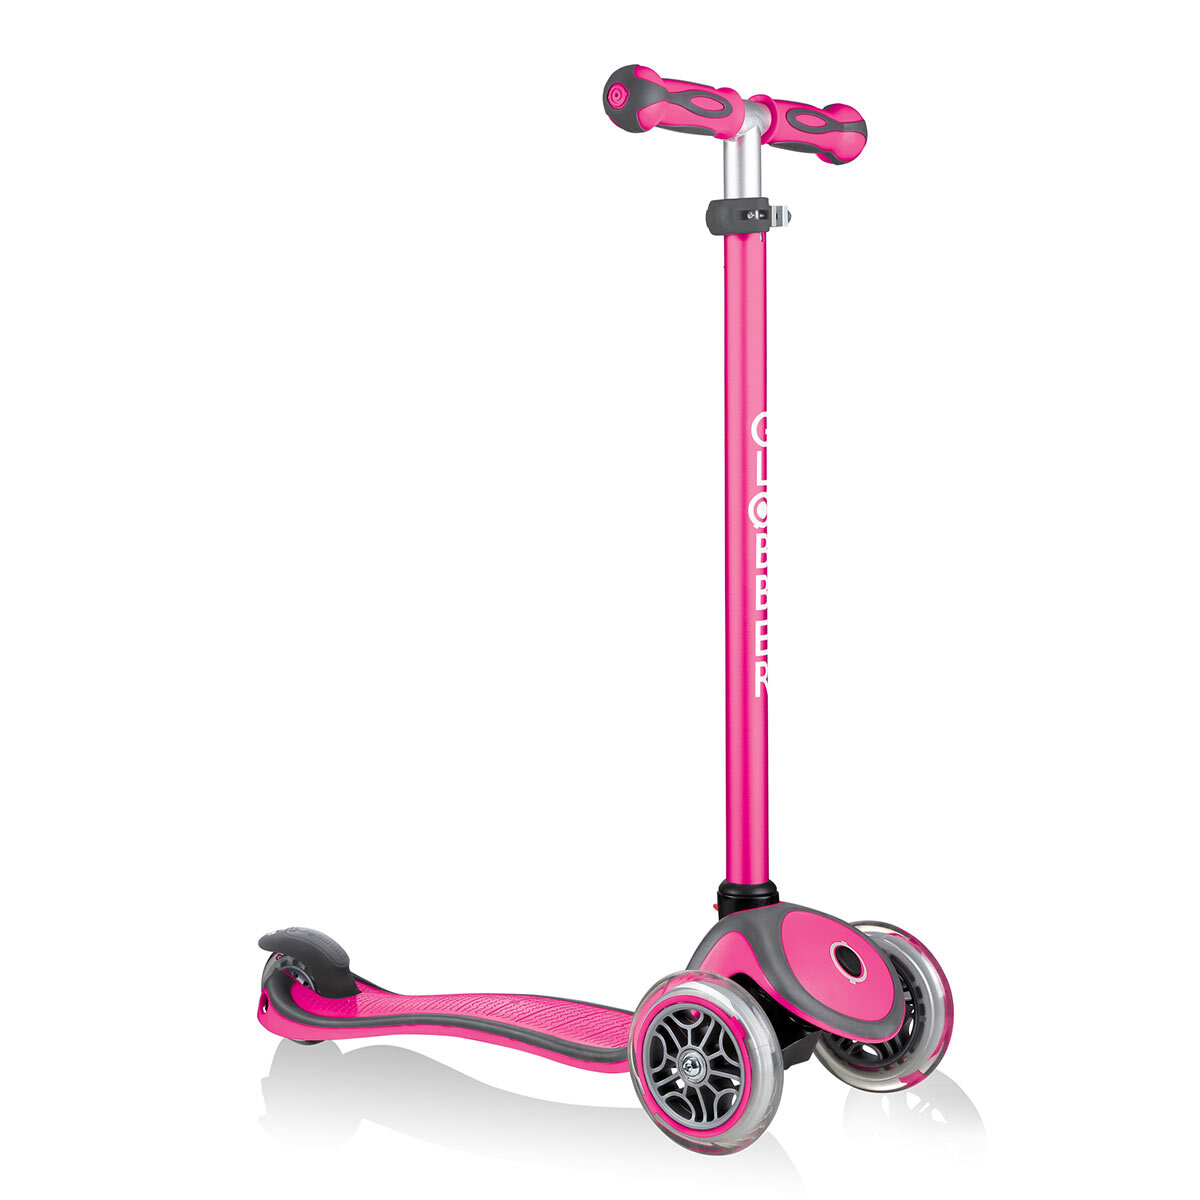 Buy Globber Go Up Comfort Scooter in Pink Step 3 Image at Costco.co.uk